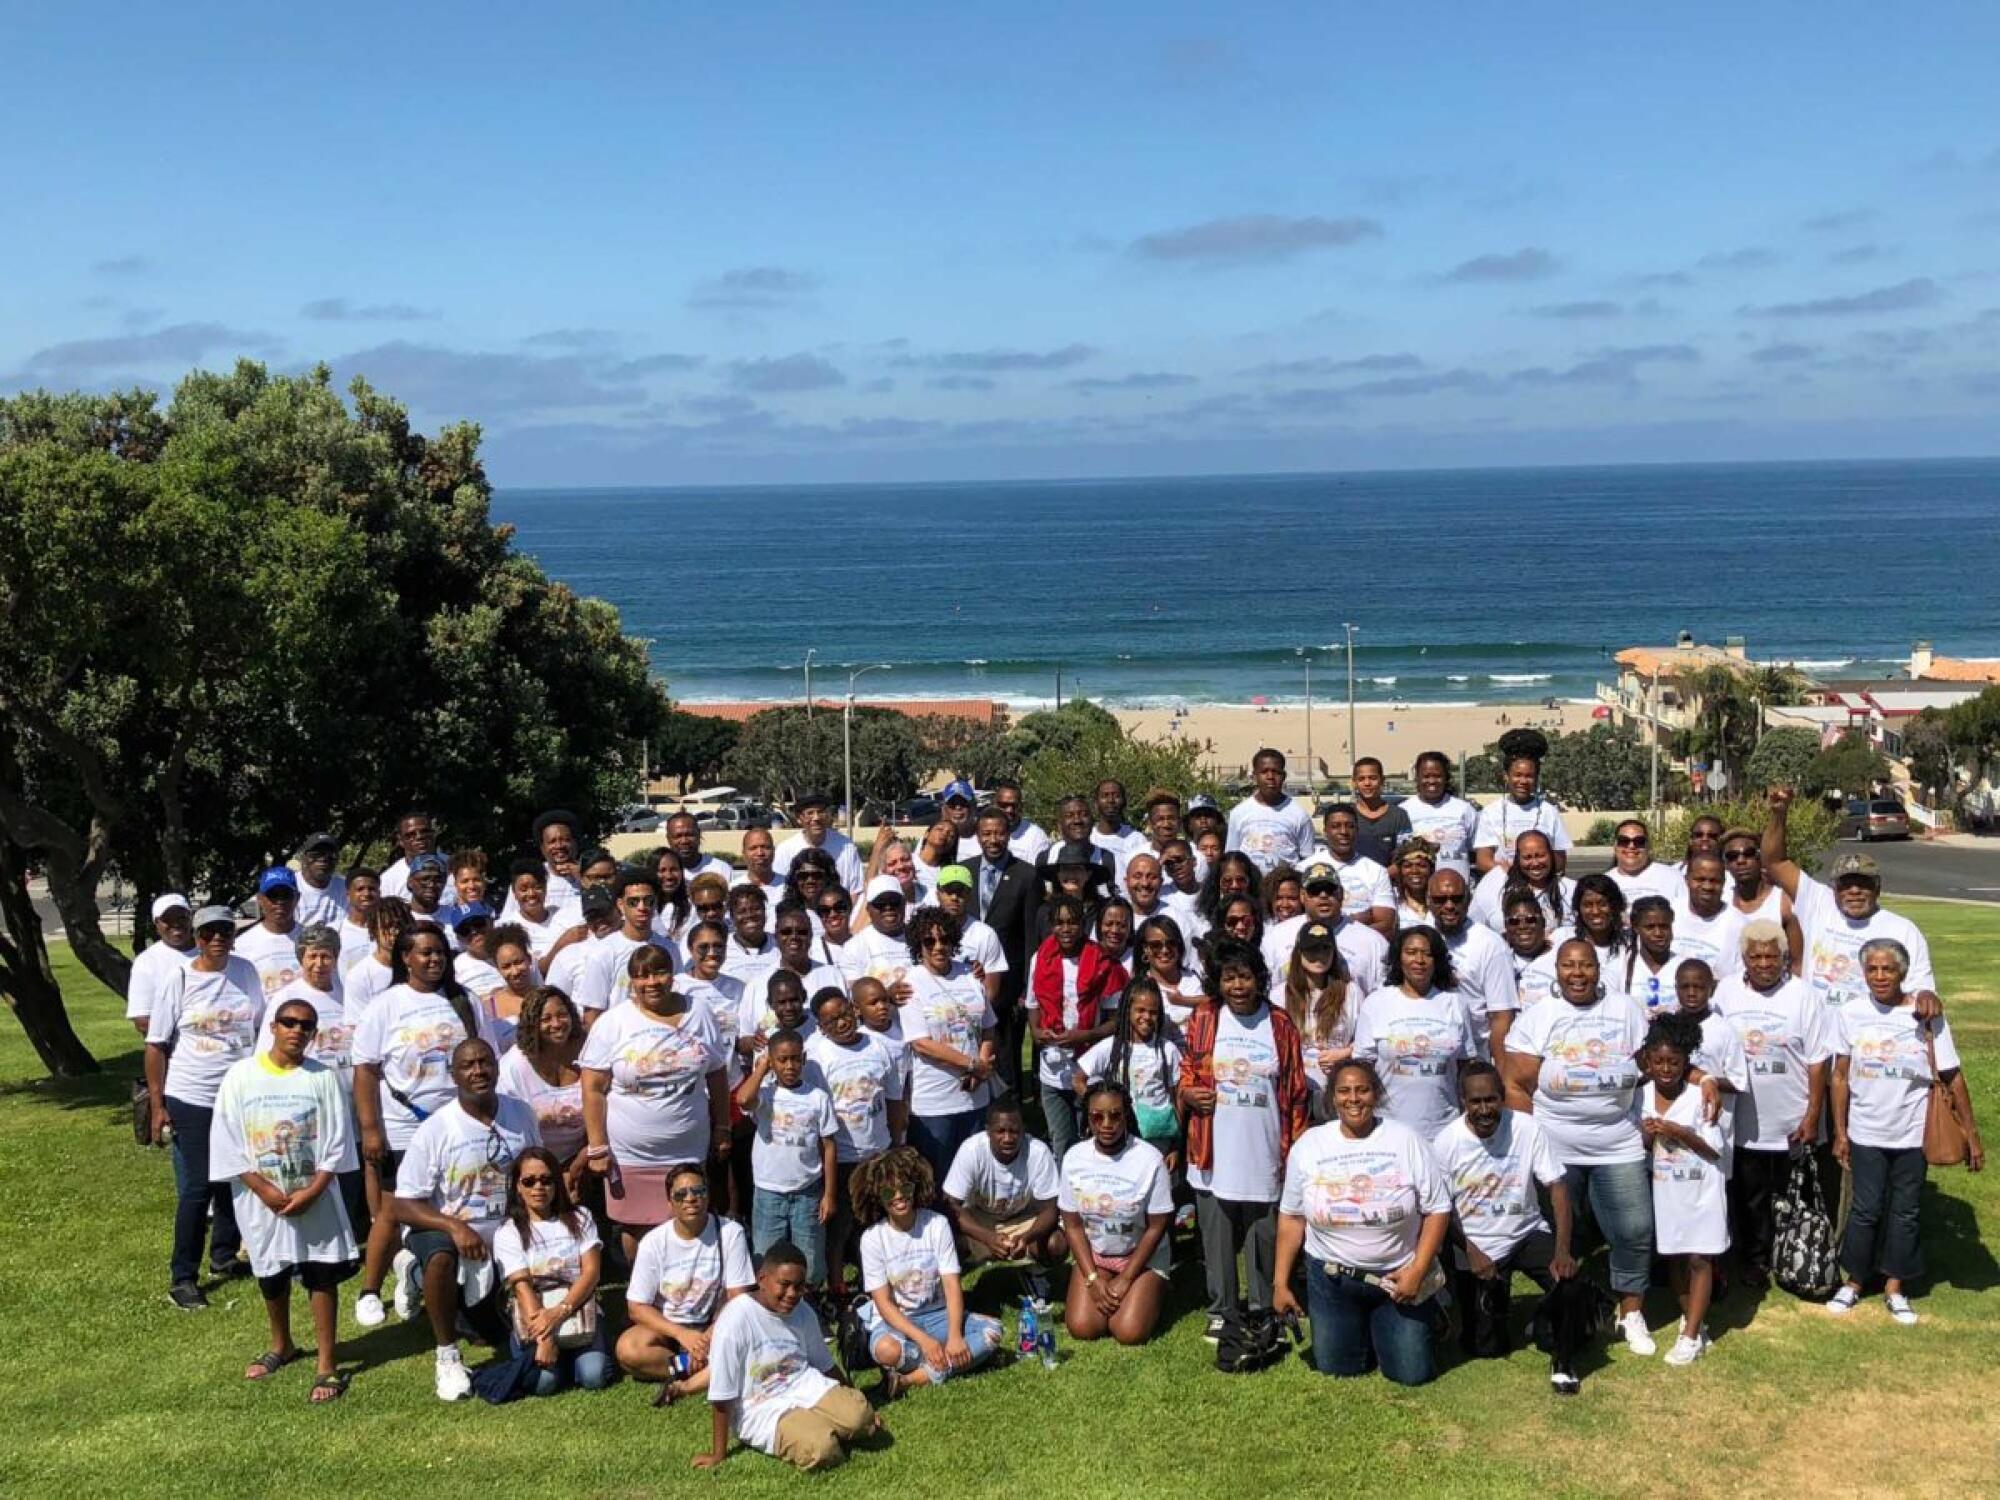 Descendants of Charles and Willa Bruce gathered in 2018 at Bruce's Beach, in Manhattan Beach, for a family reunion.